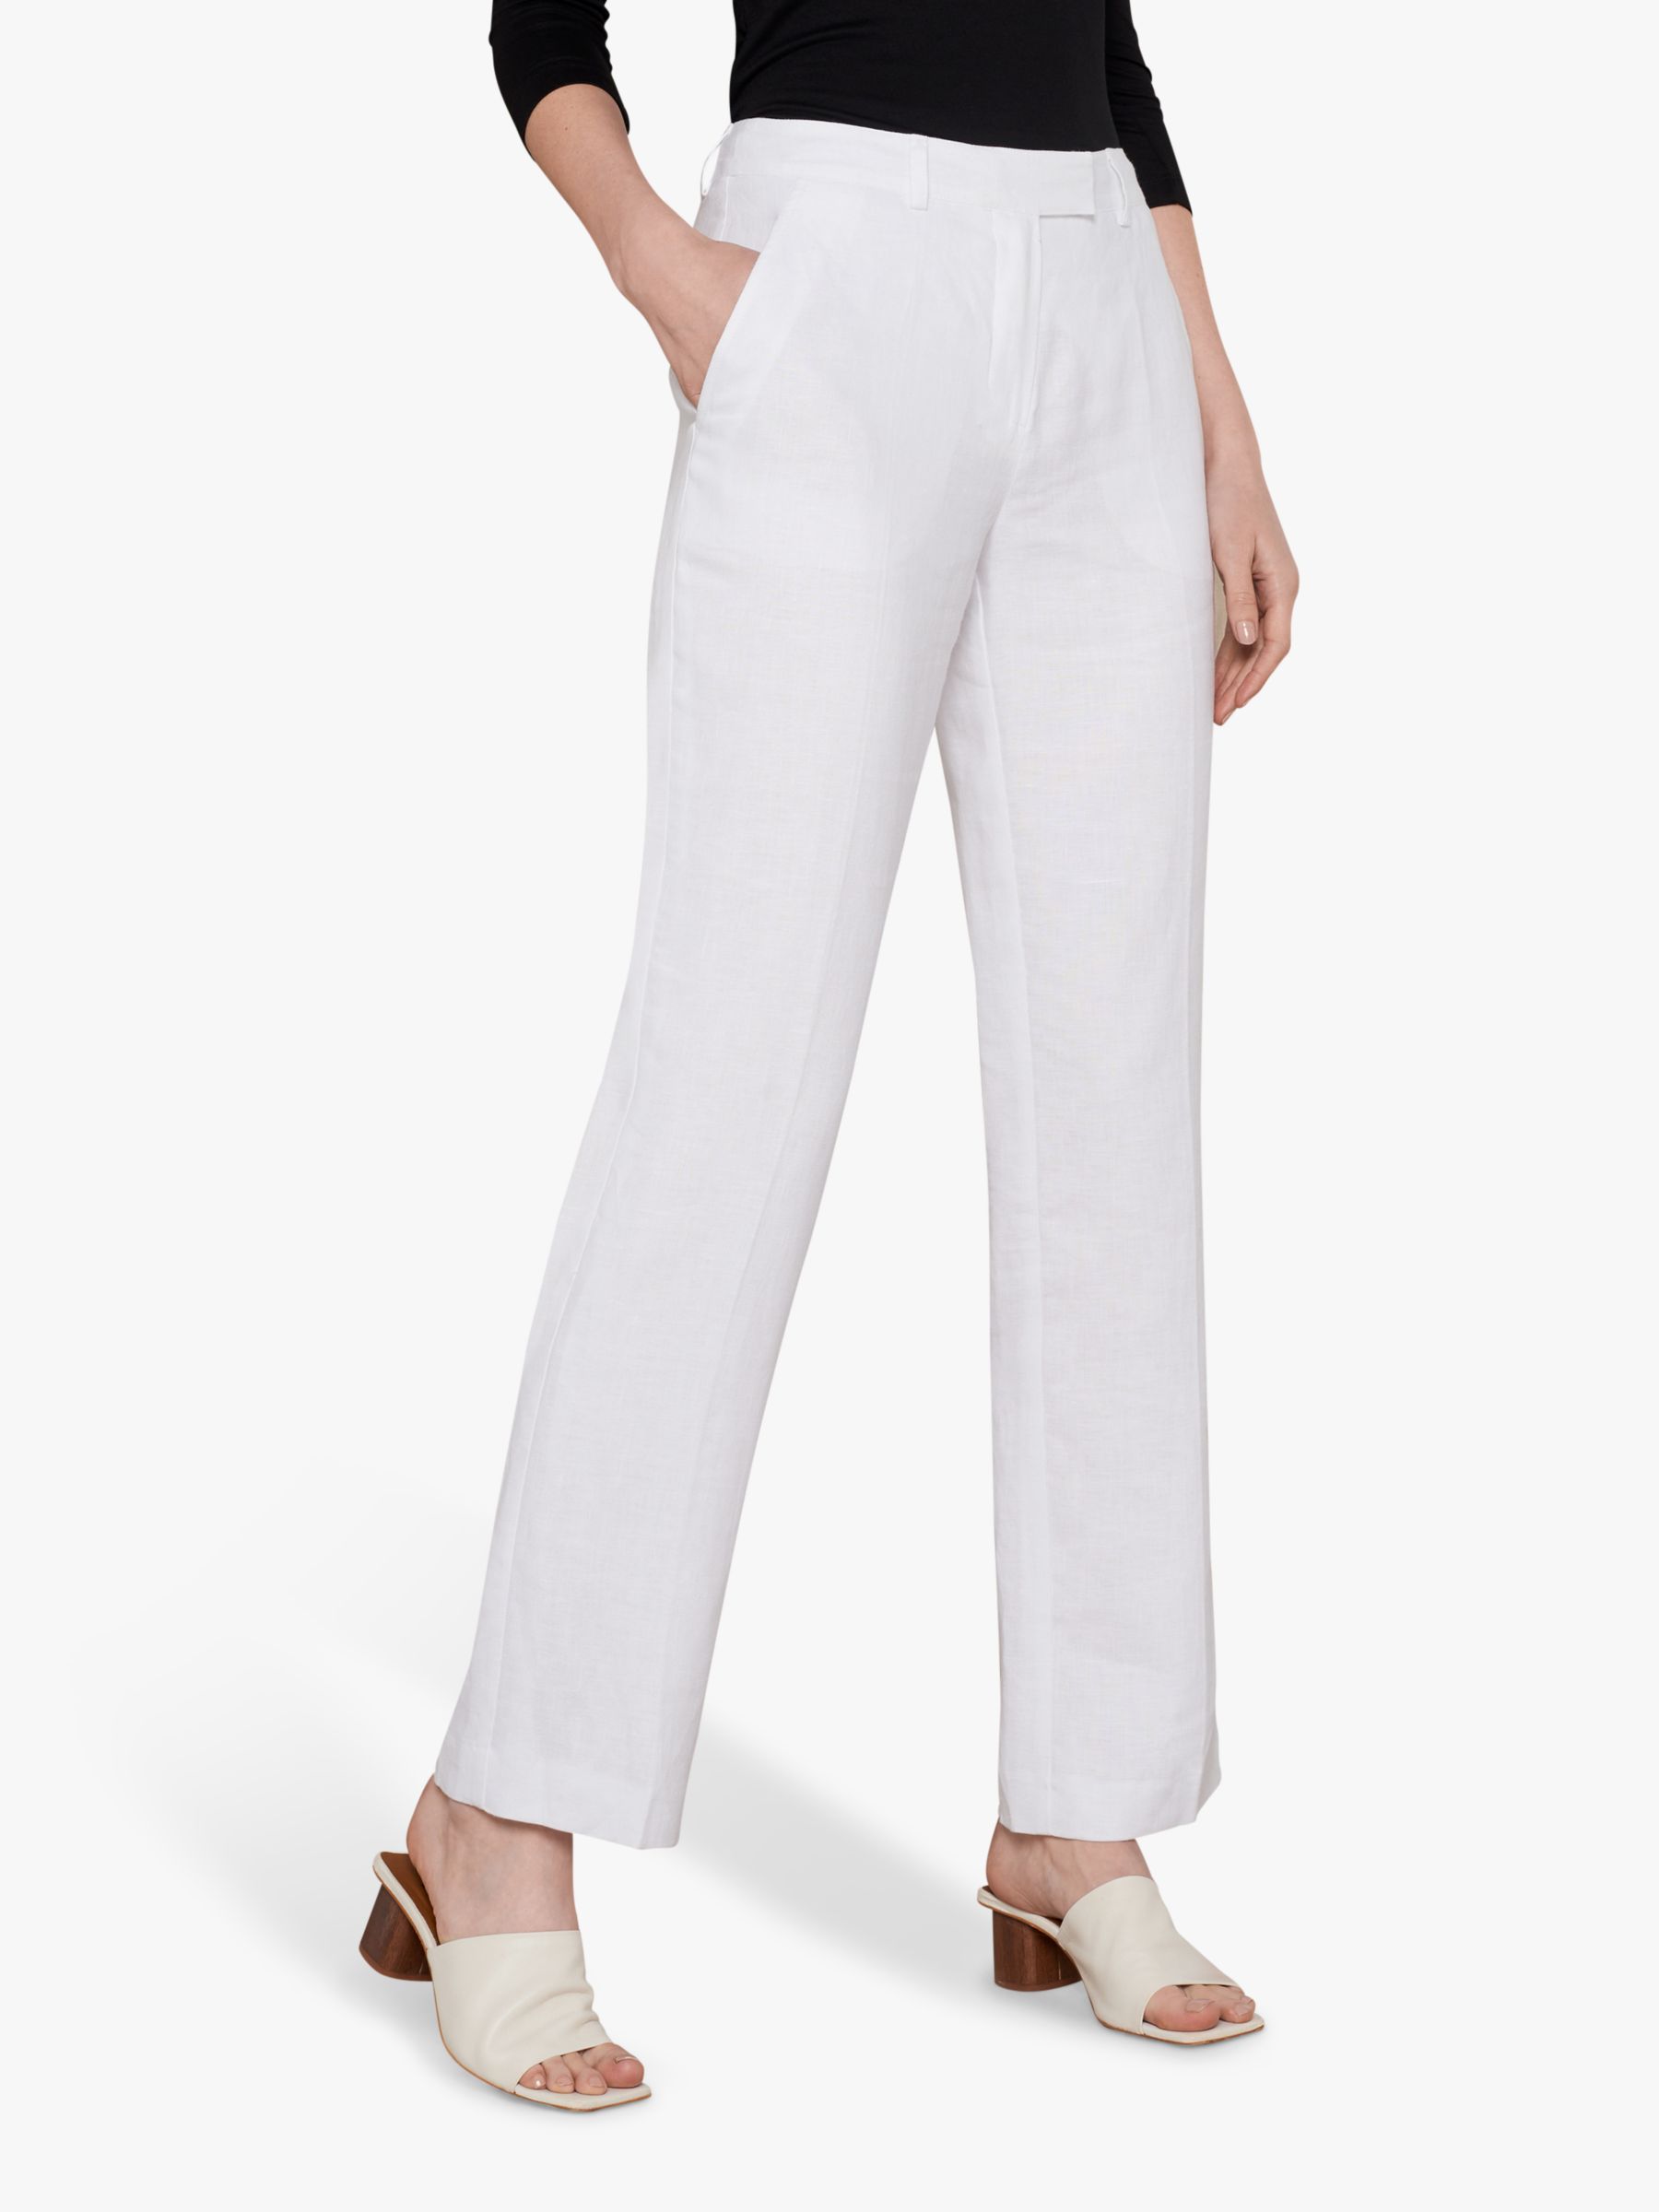 Jaeger Linen 7/8s Trousers, White at John Lewis & Partners